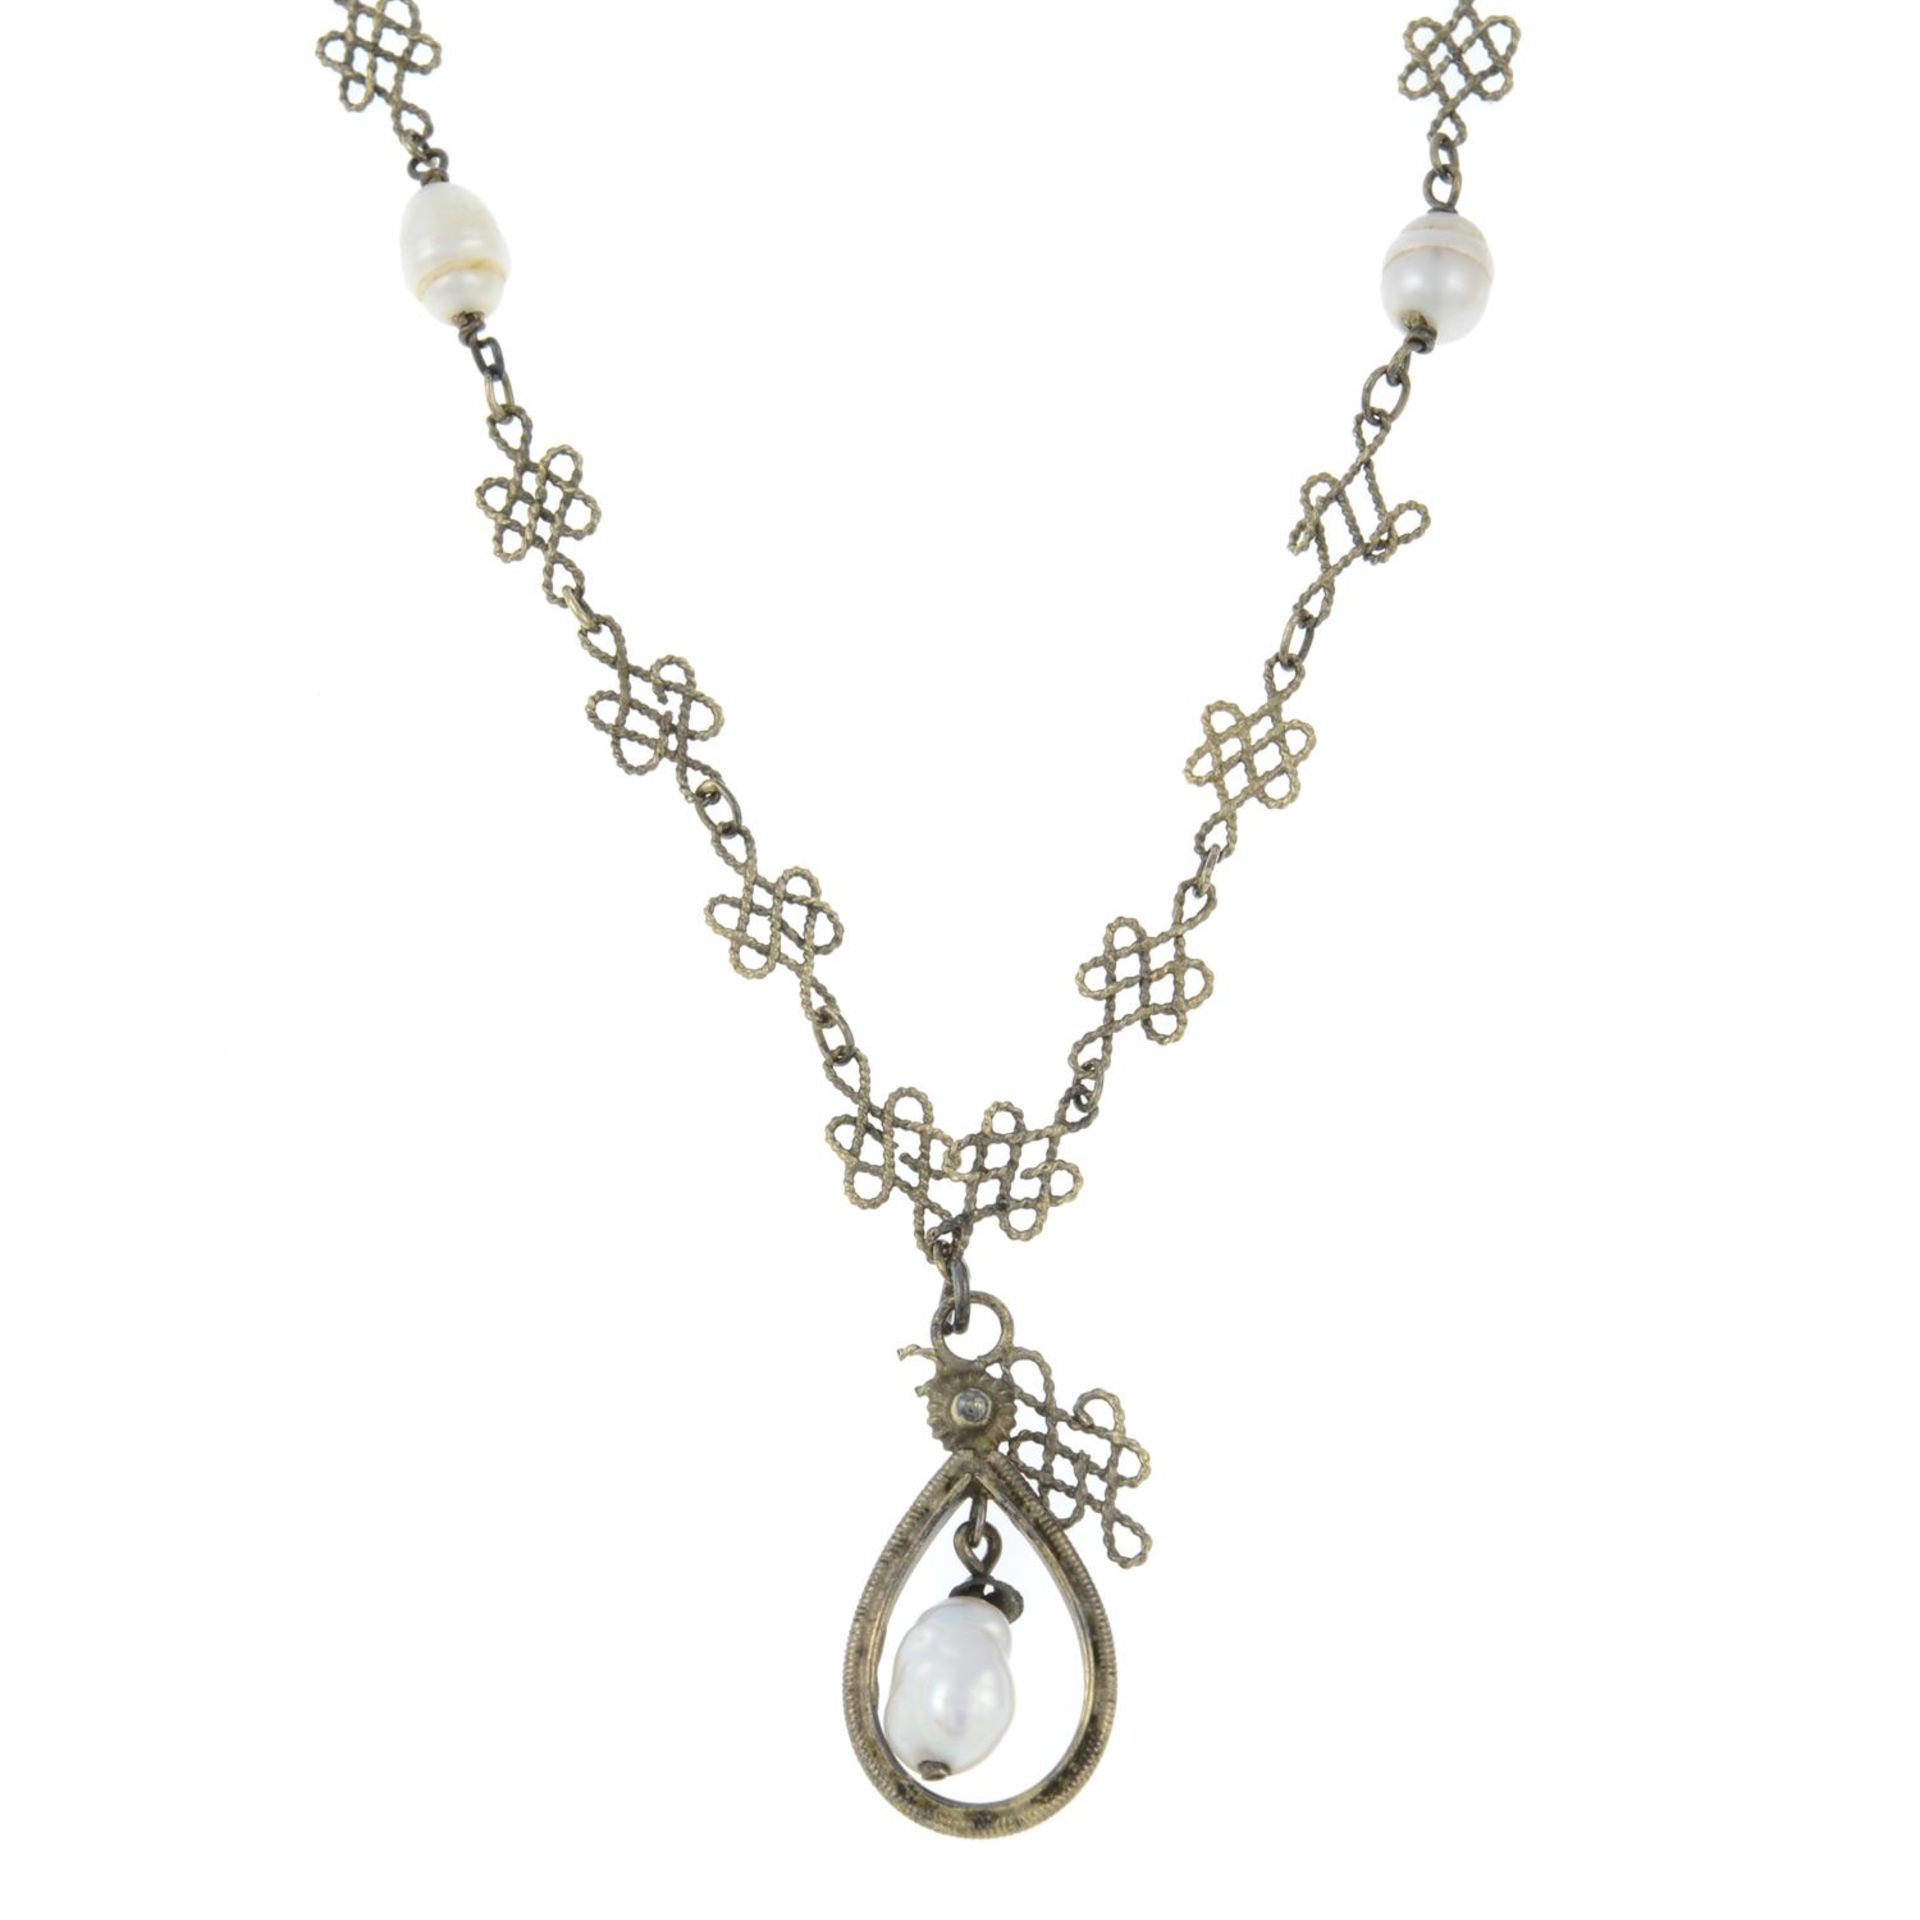 A cultured pearl openwork necklace.